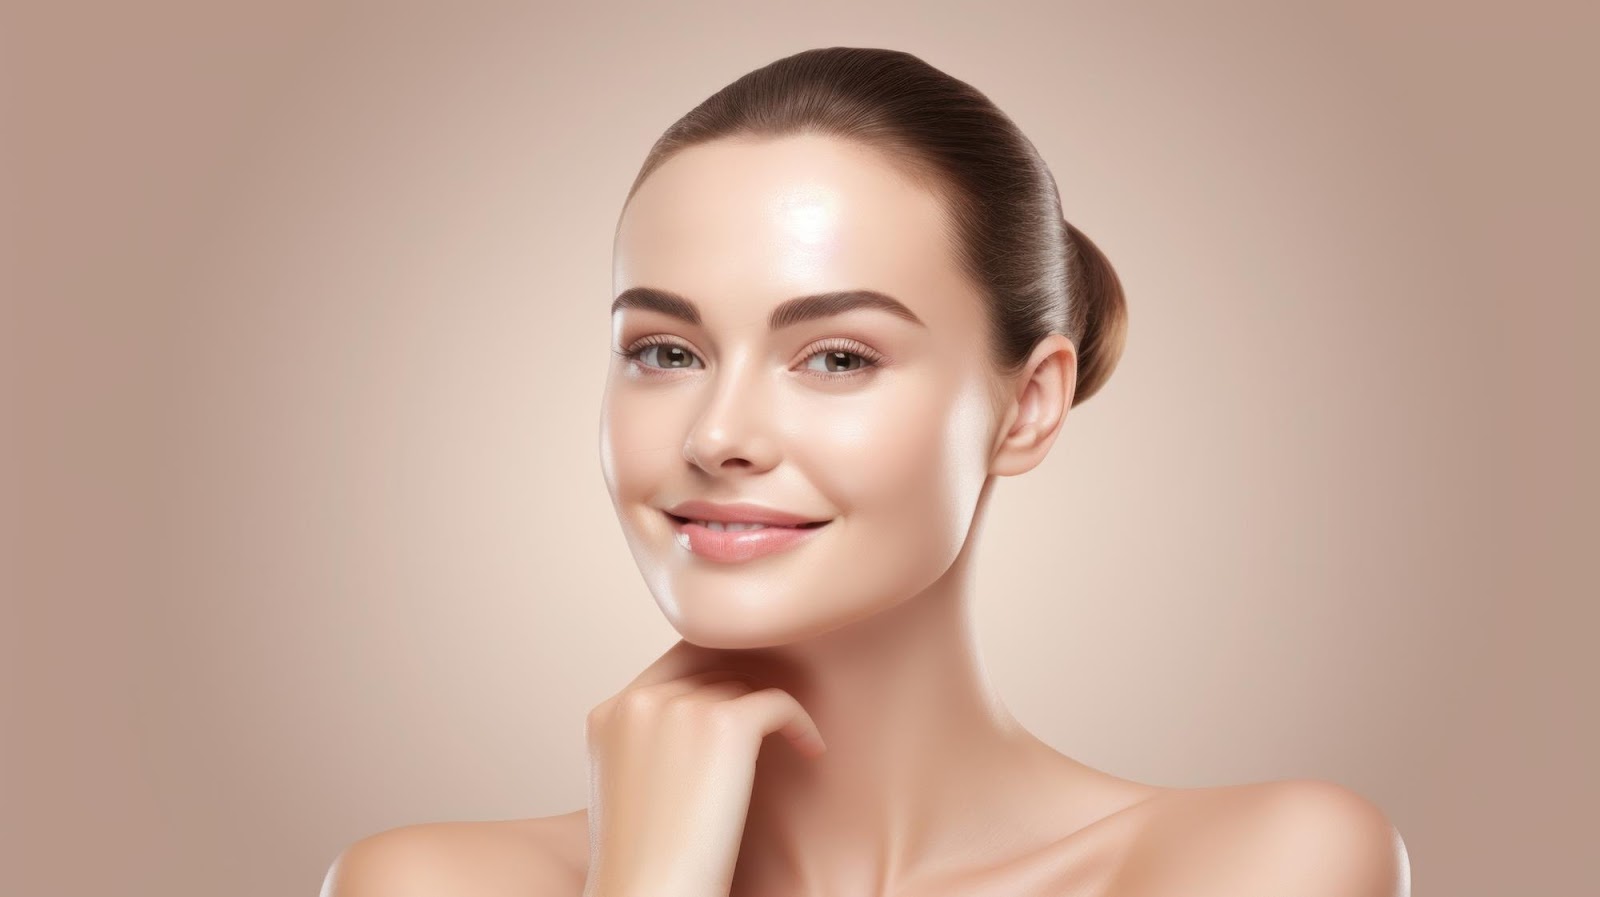 Woman looking glowing as her skin's collagen levels are boosted.